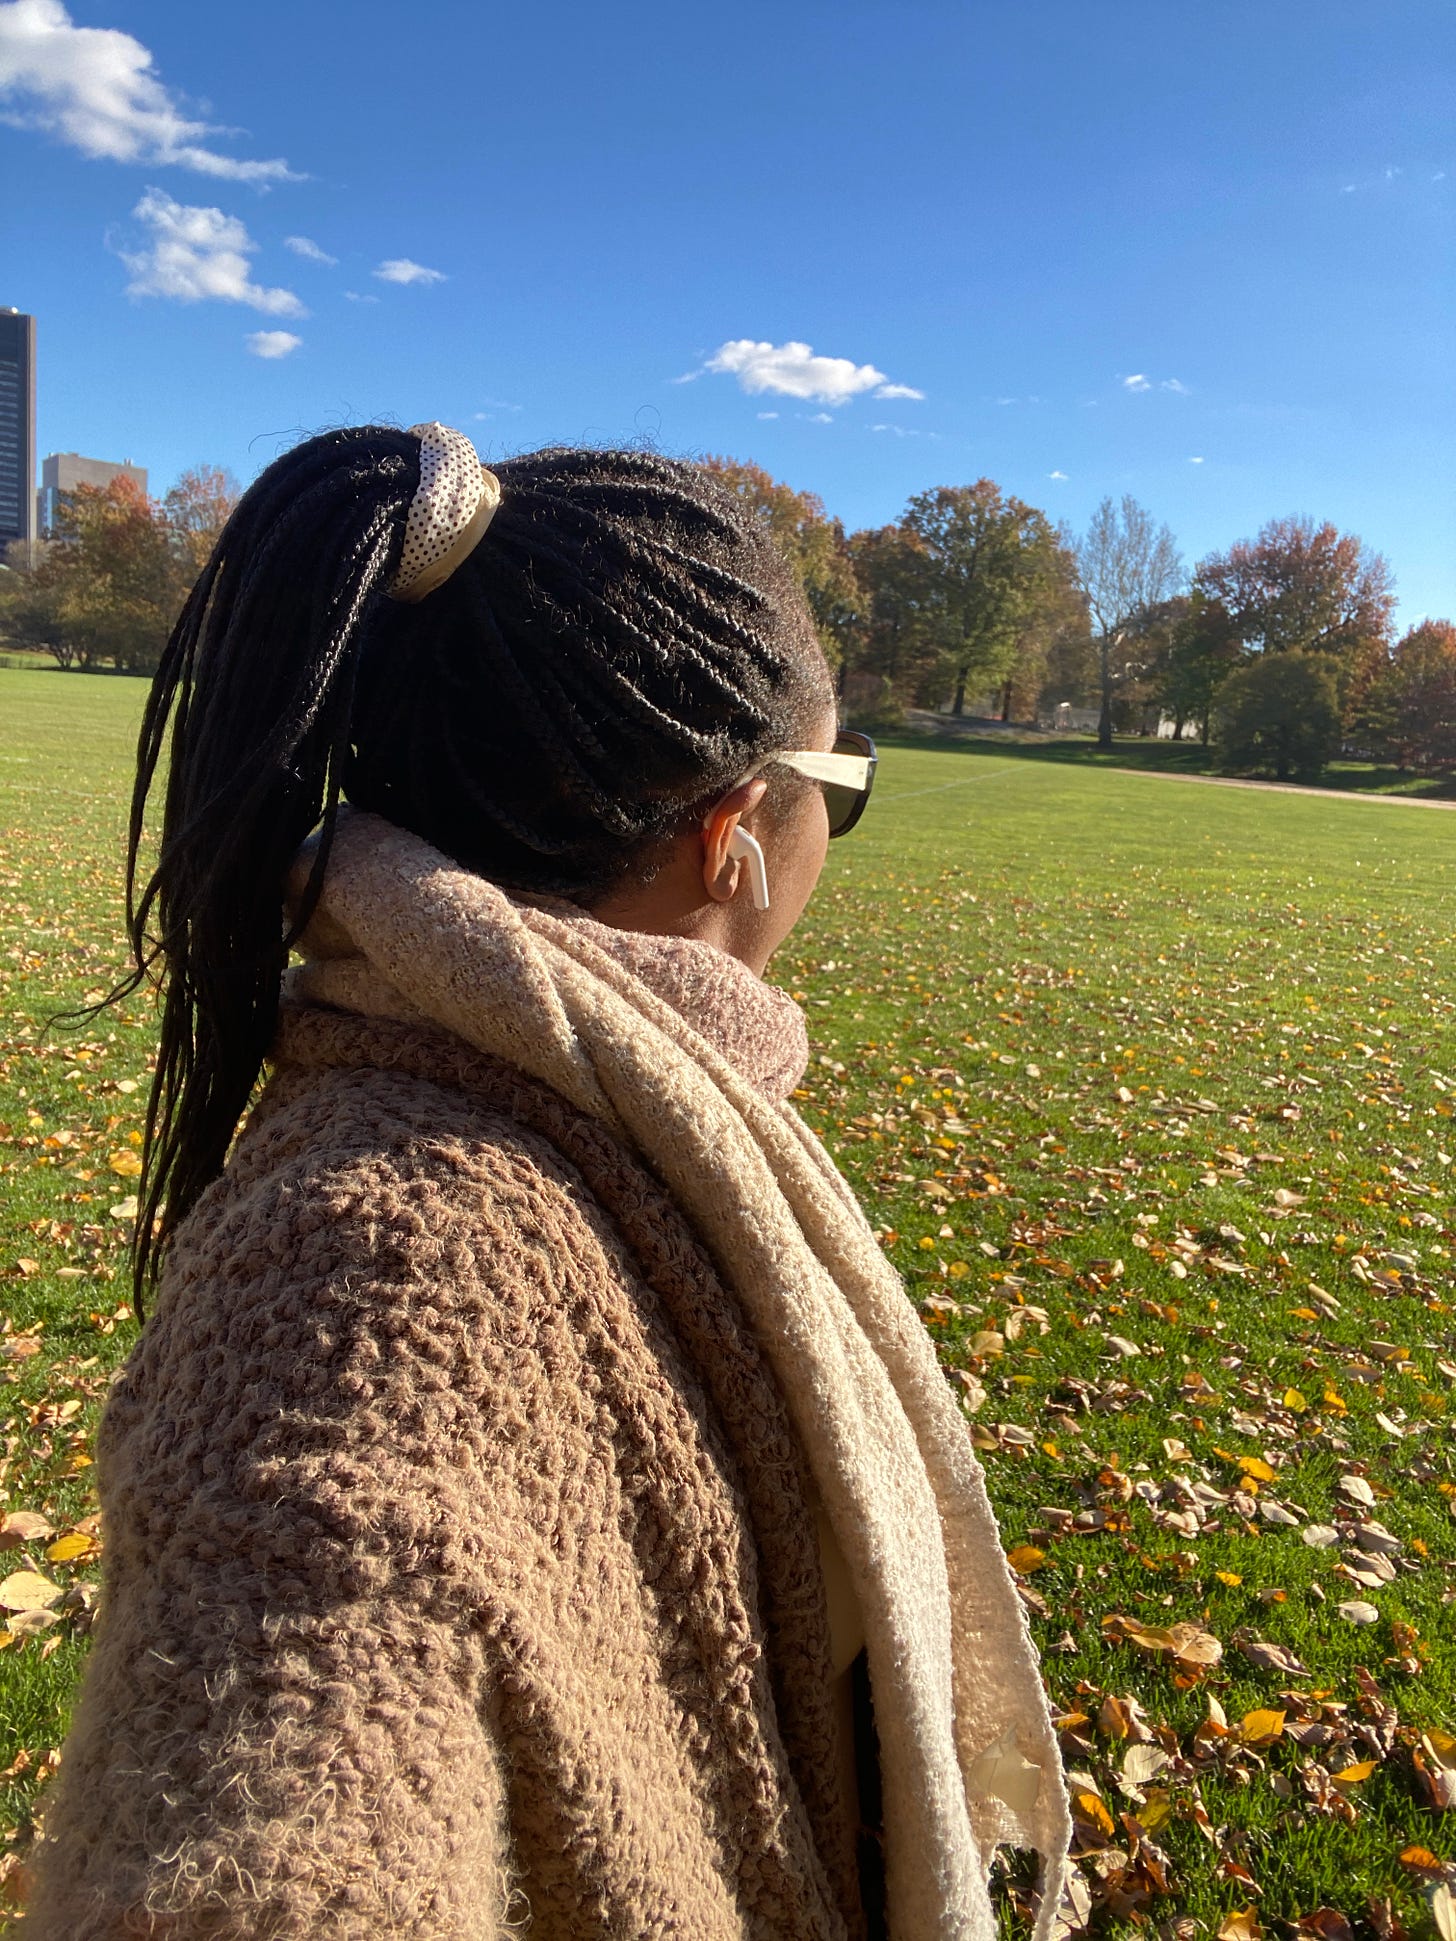  Alexa is in a field in Central Park, with dead leaves strewn across the grass. The sky is clear blue with a few clouds, and there are some trees with leaves on them in the distance. Alexa’s back is to the camera, and you can only see her from the waist or so up. You can see a tiny slice of her face - enough to see her ear with an apple AirPods in it, and her black sunglasses with white temples. Her braids are up in a ponytail, held by a white satin scrungee with polka dots. She is wearing a camel tan, soft teddy bear like sweater with long sleeves, and a thick pink and tan ombre scarf, wrapped around her neck. 